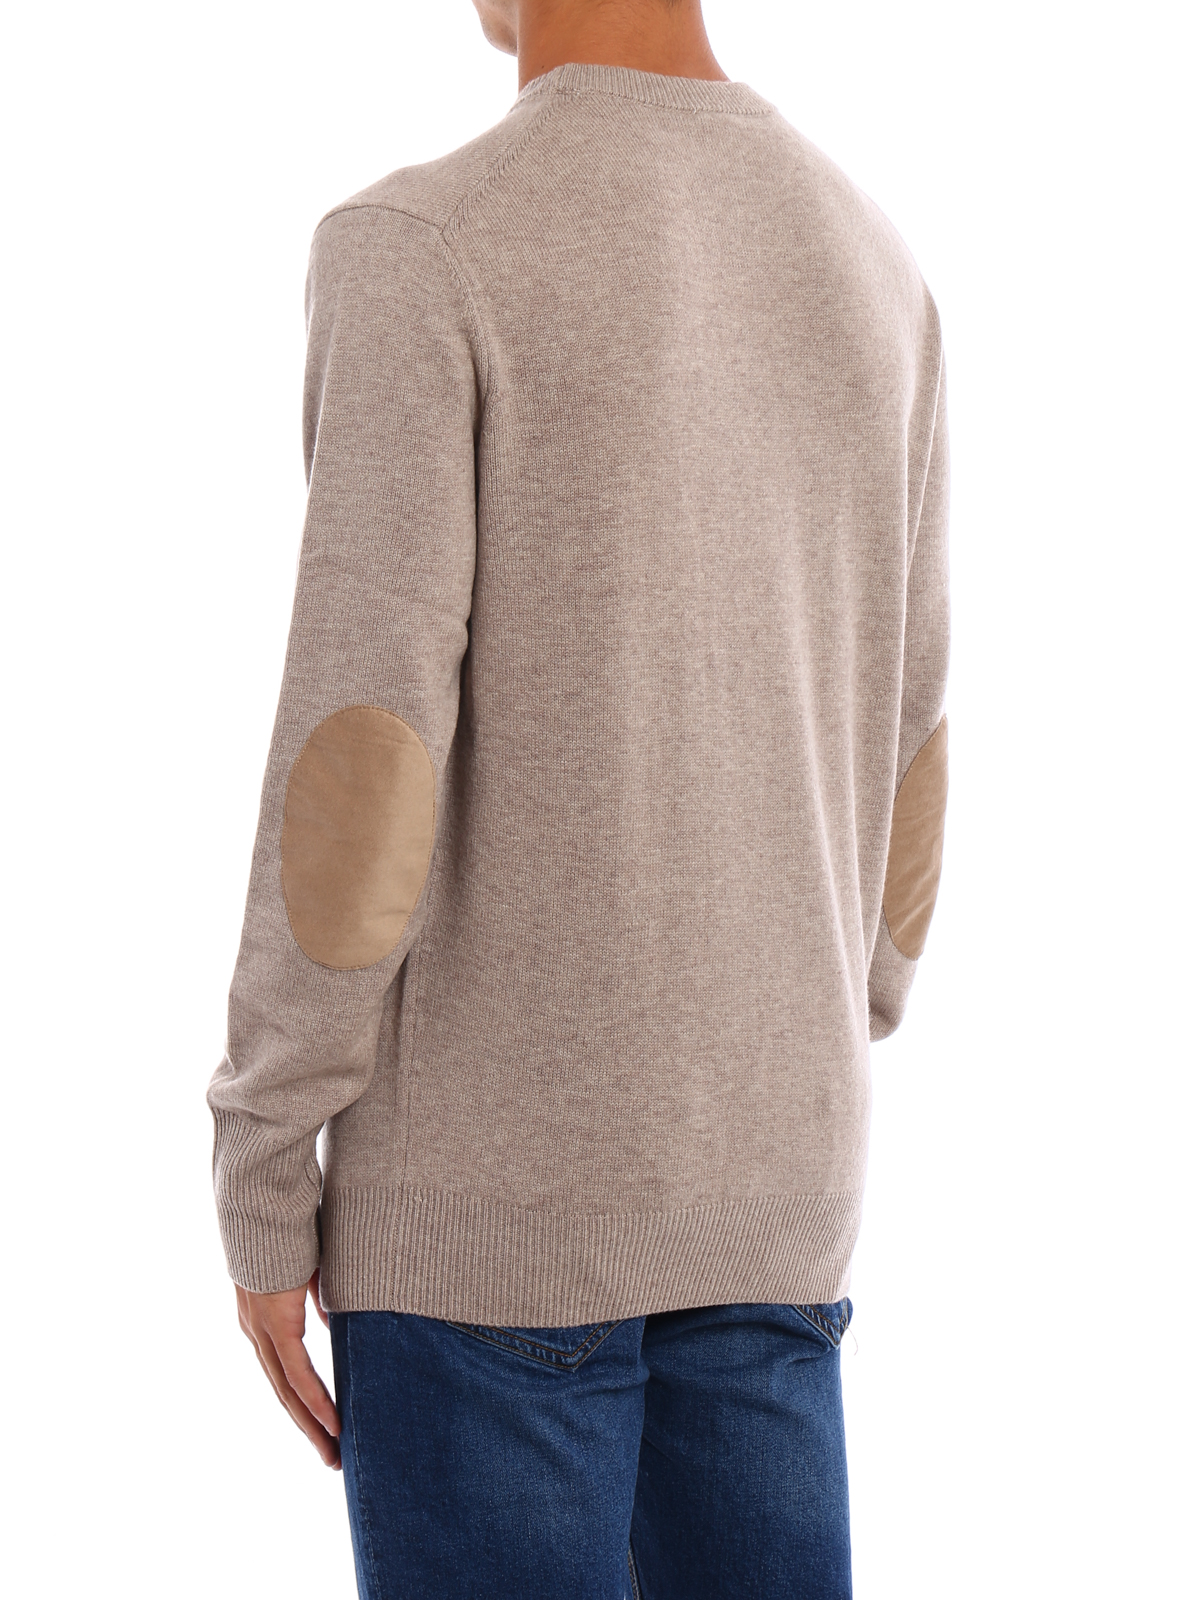 elbow patches for wool sweaters wholesale store